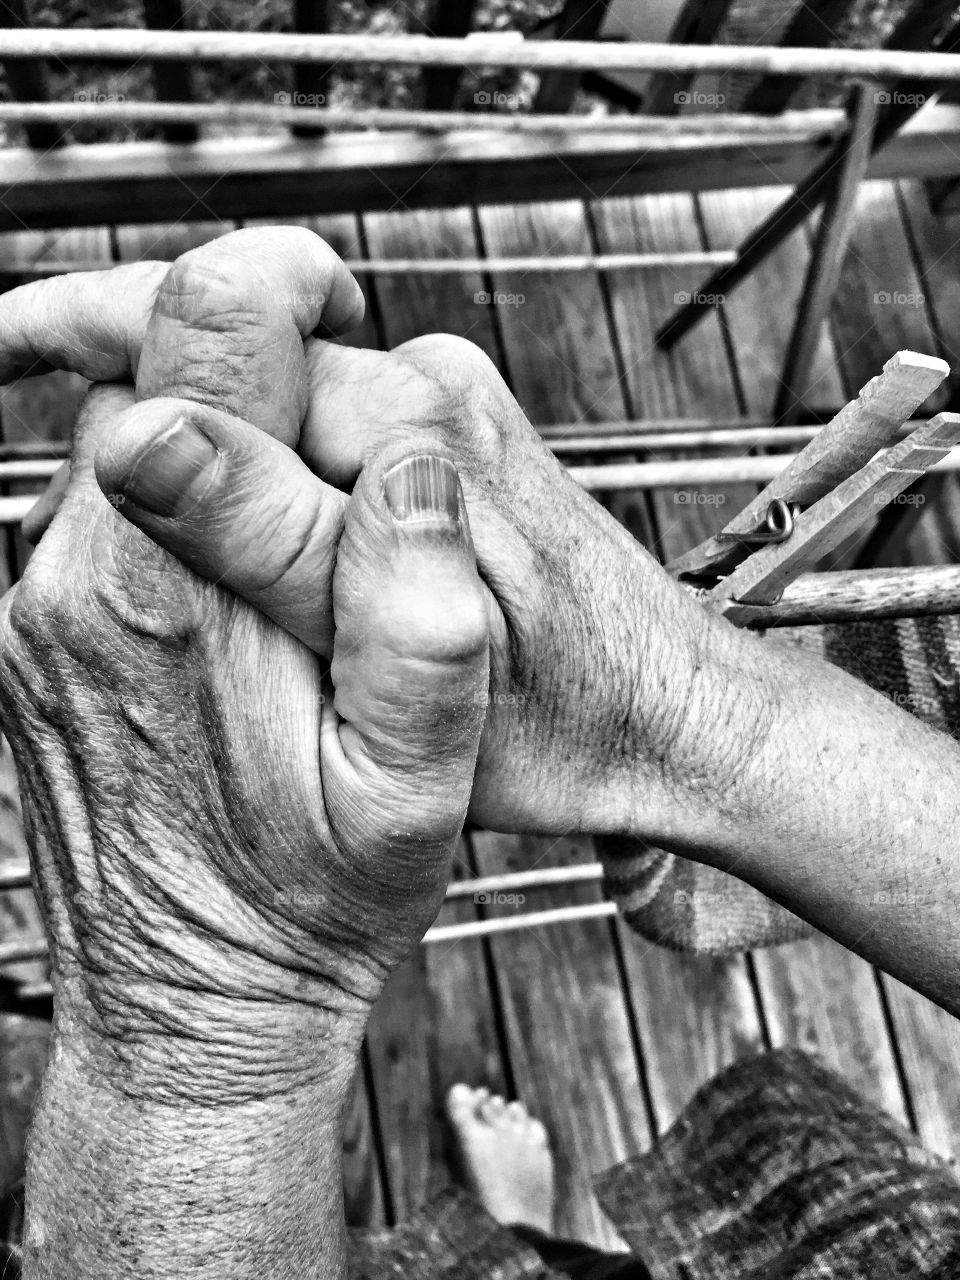 Aging hands hanging laundry